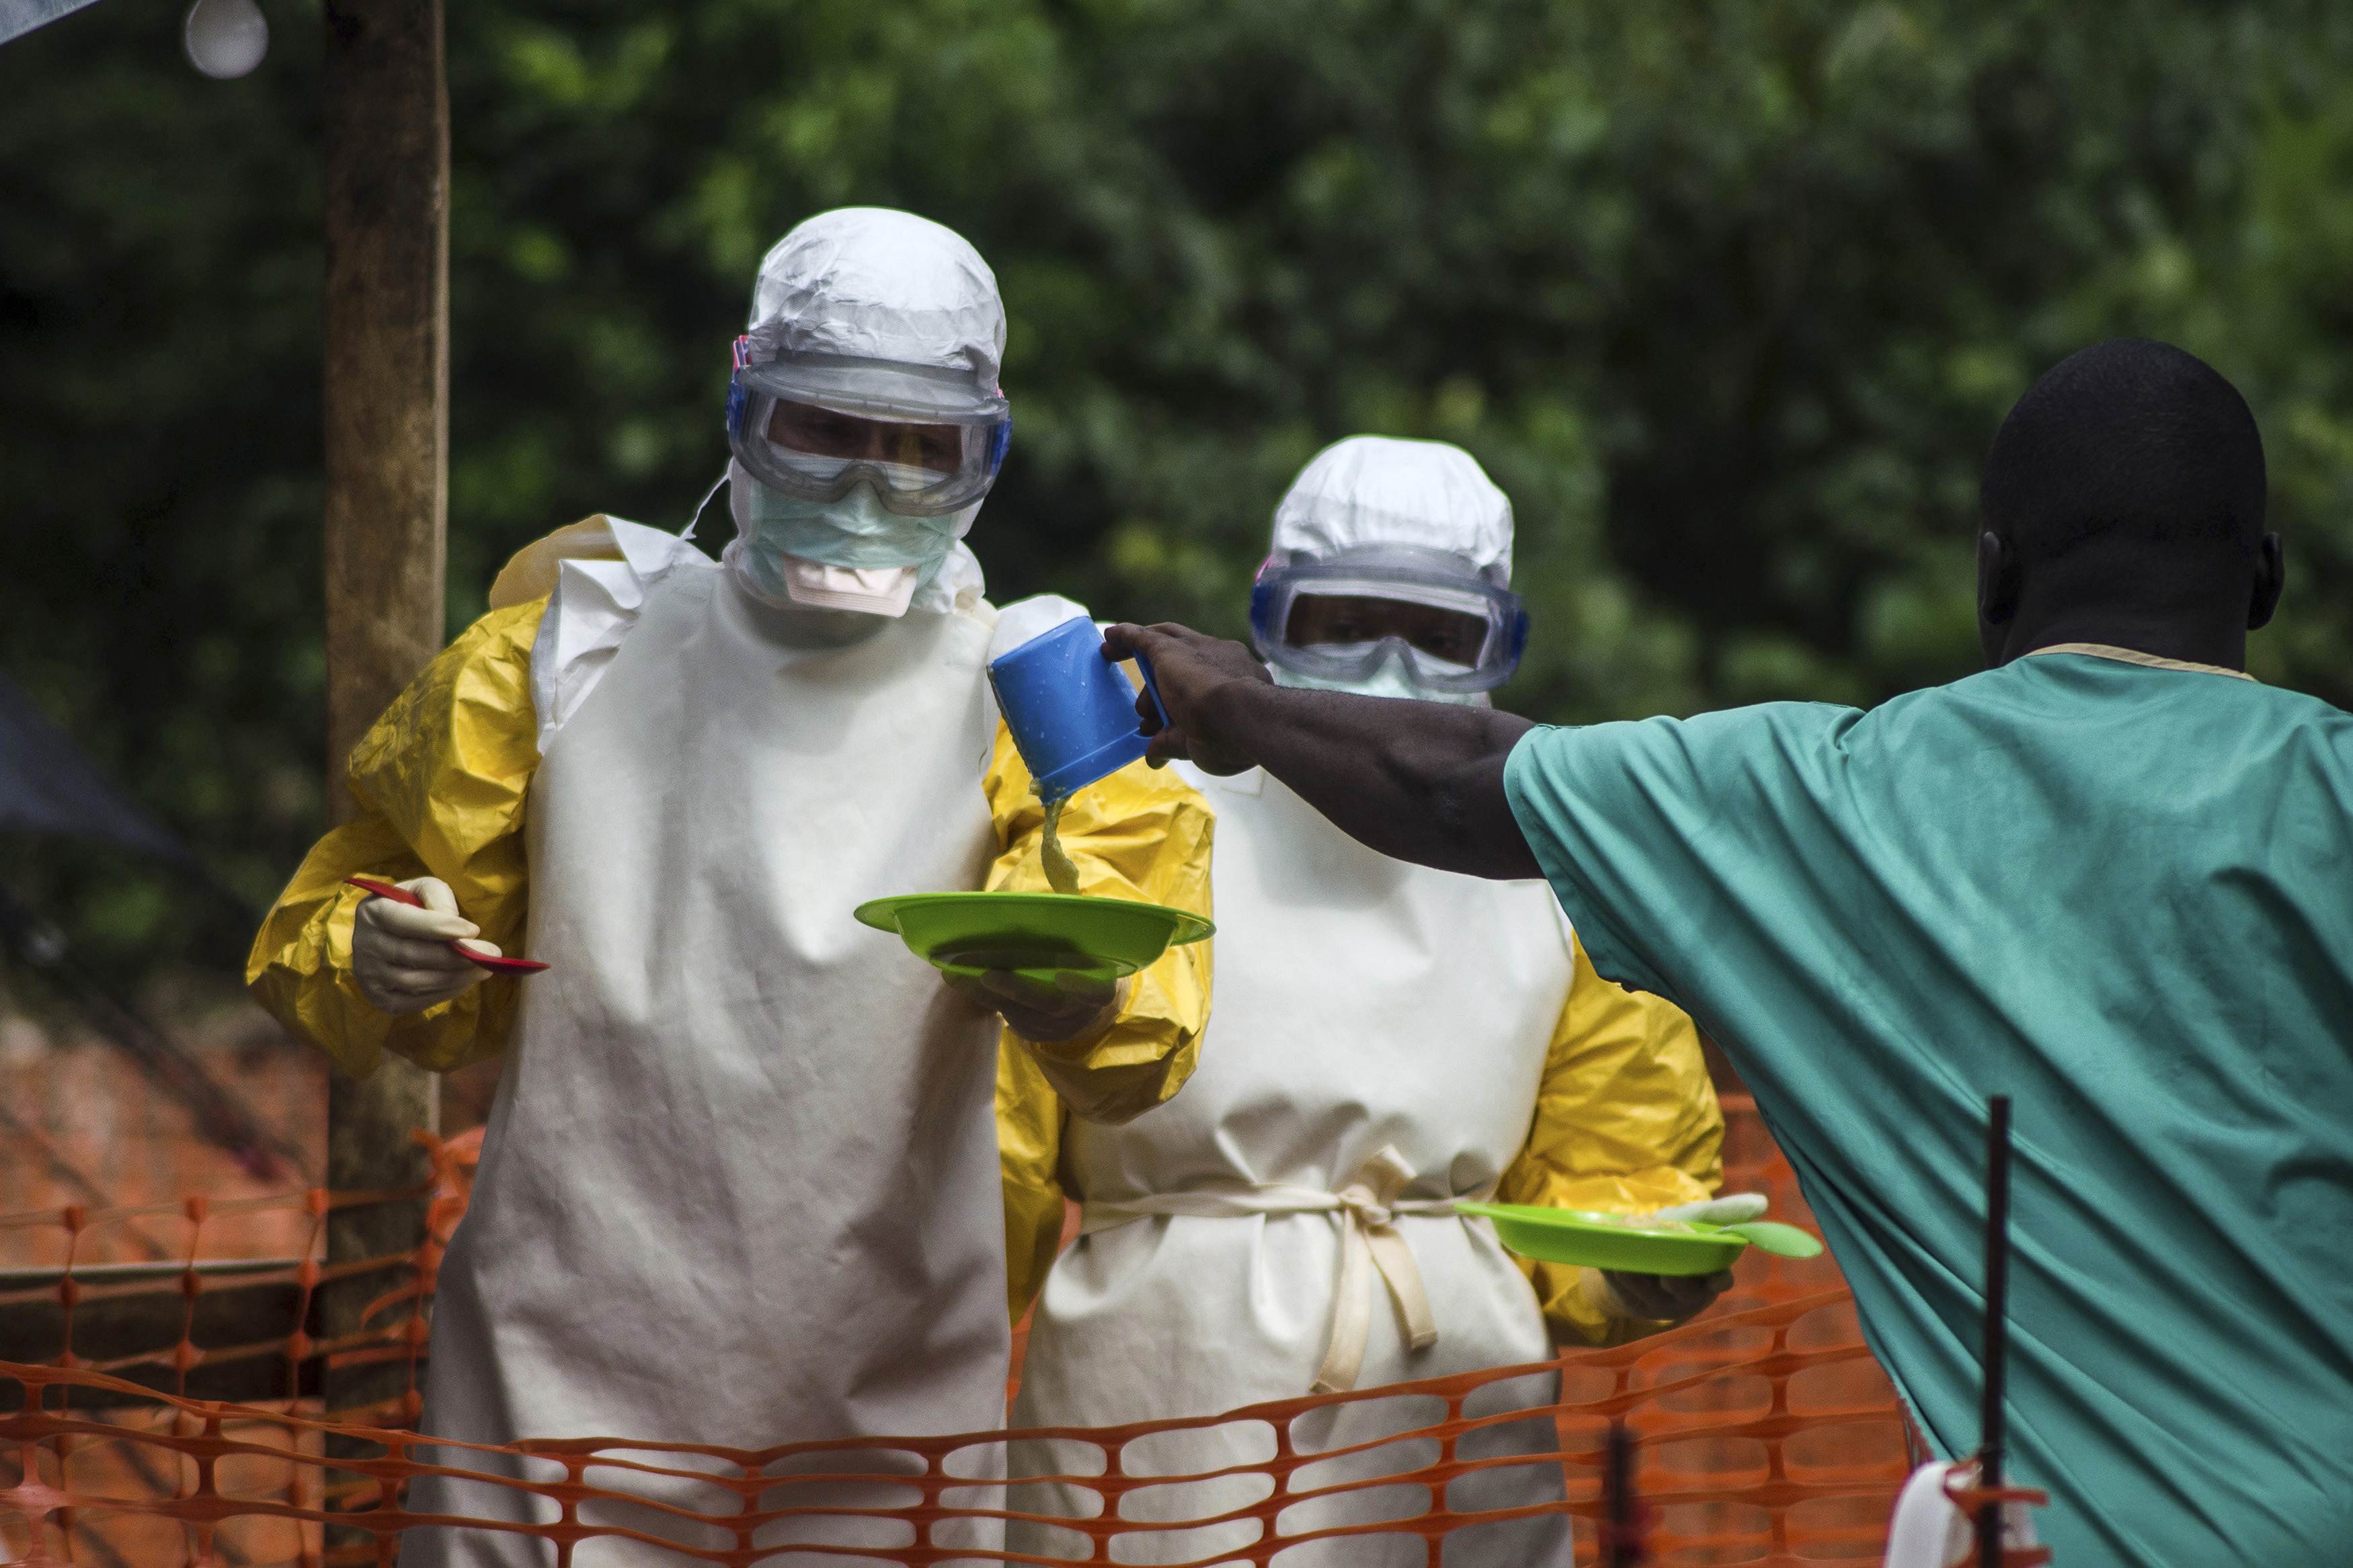 Medical staff working with Medecins sans Frontieres (MSF) prepare to bring food to patients kept in an isolation area at the MSF Ebola treatment centre in Kailahun, Sierra Leone on July 20, 2014. 